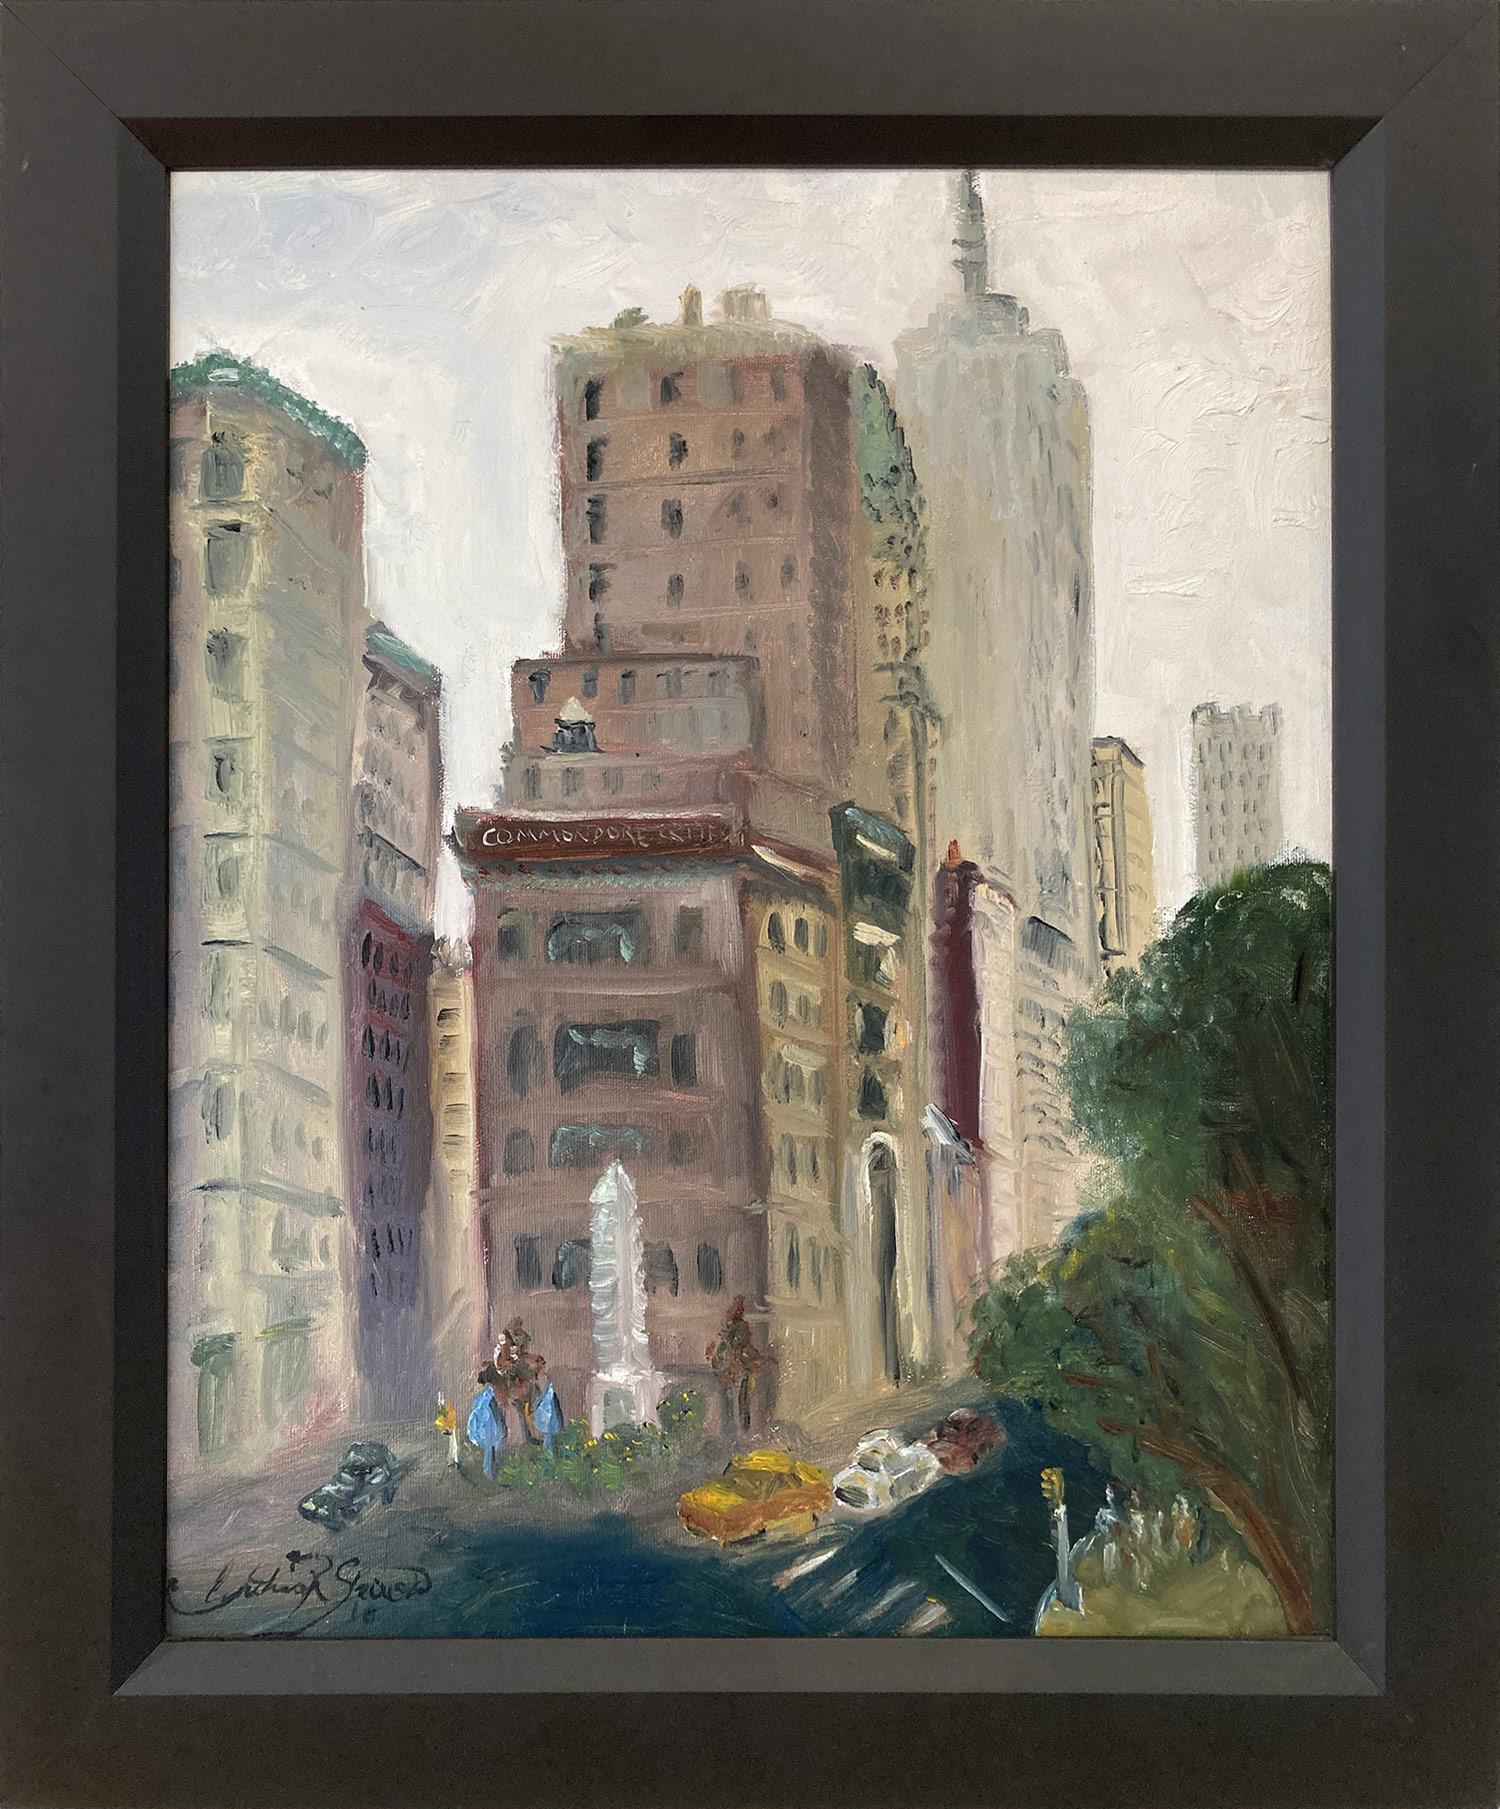 Cindy Shaoul Landscape Painting - "Empire State Building" Impressionist New York City Street Scene Oil Painting